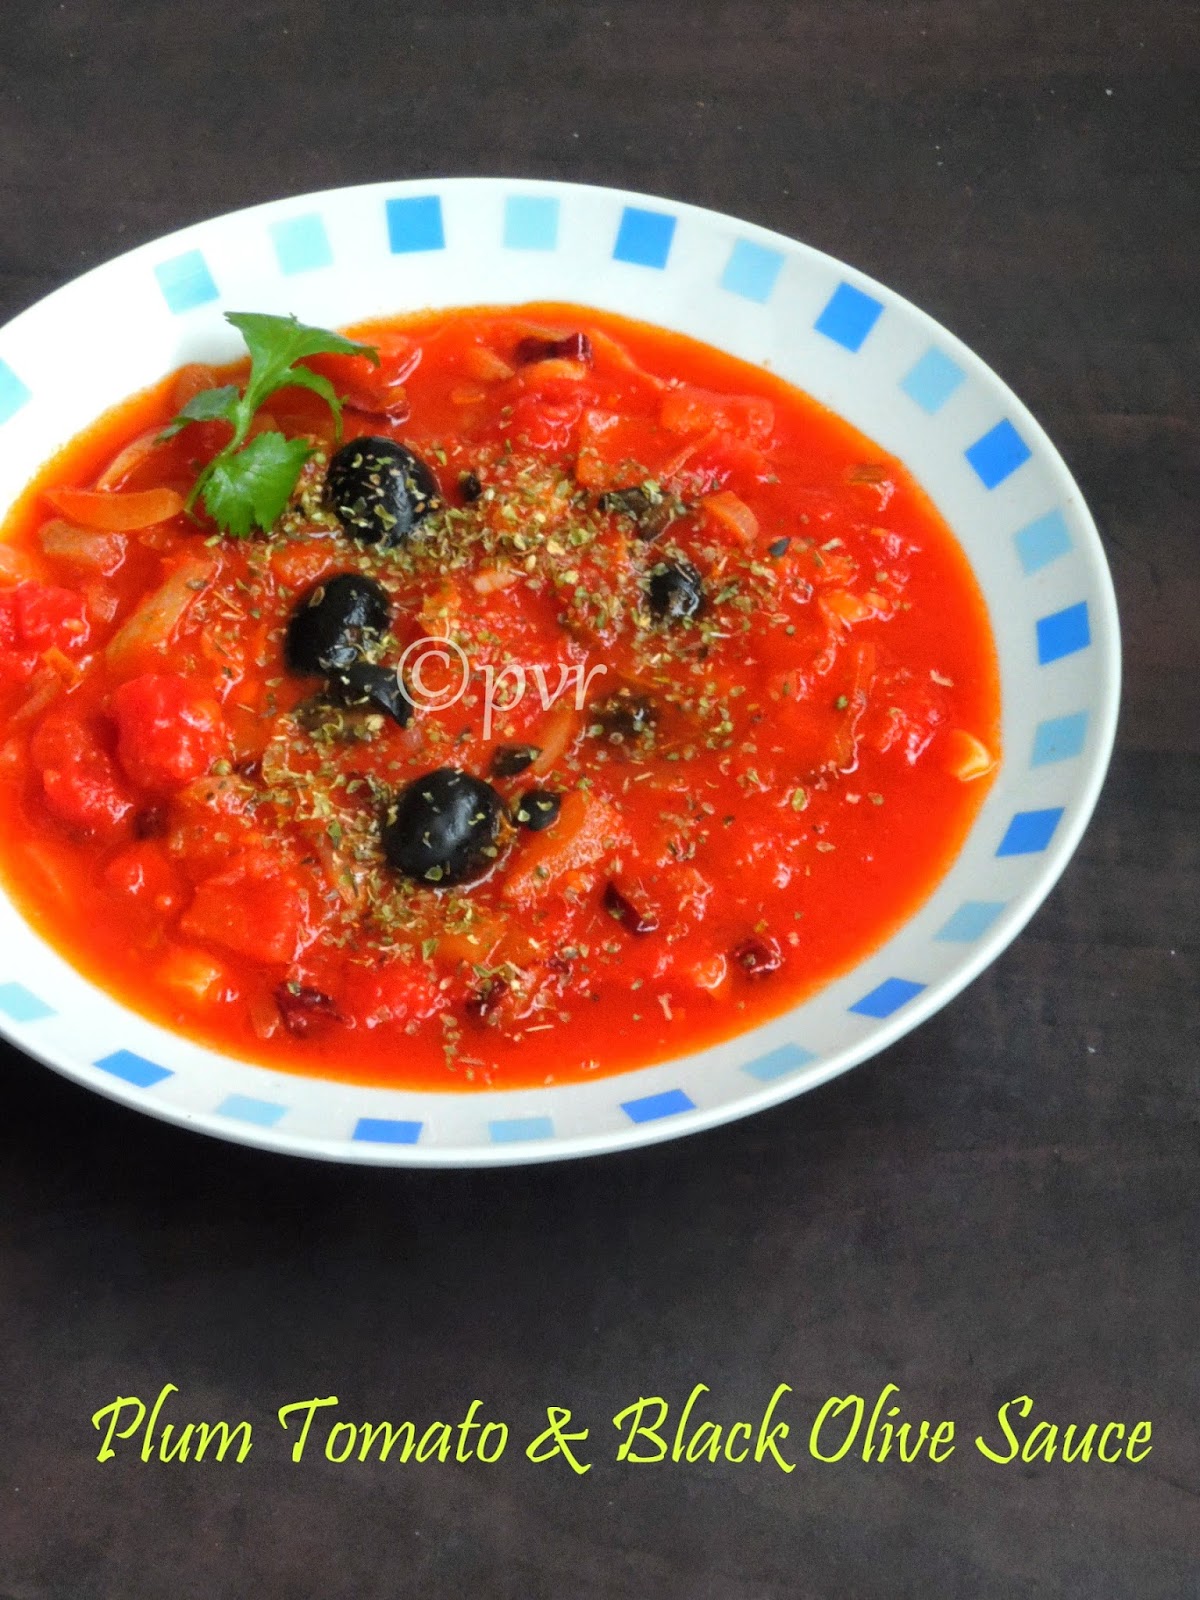 Olive and tomato sauce